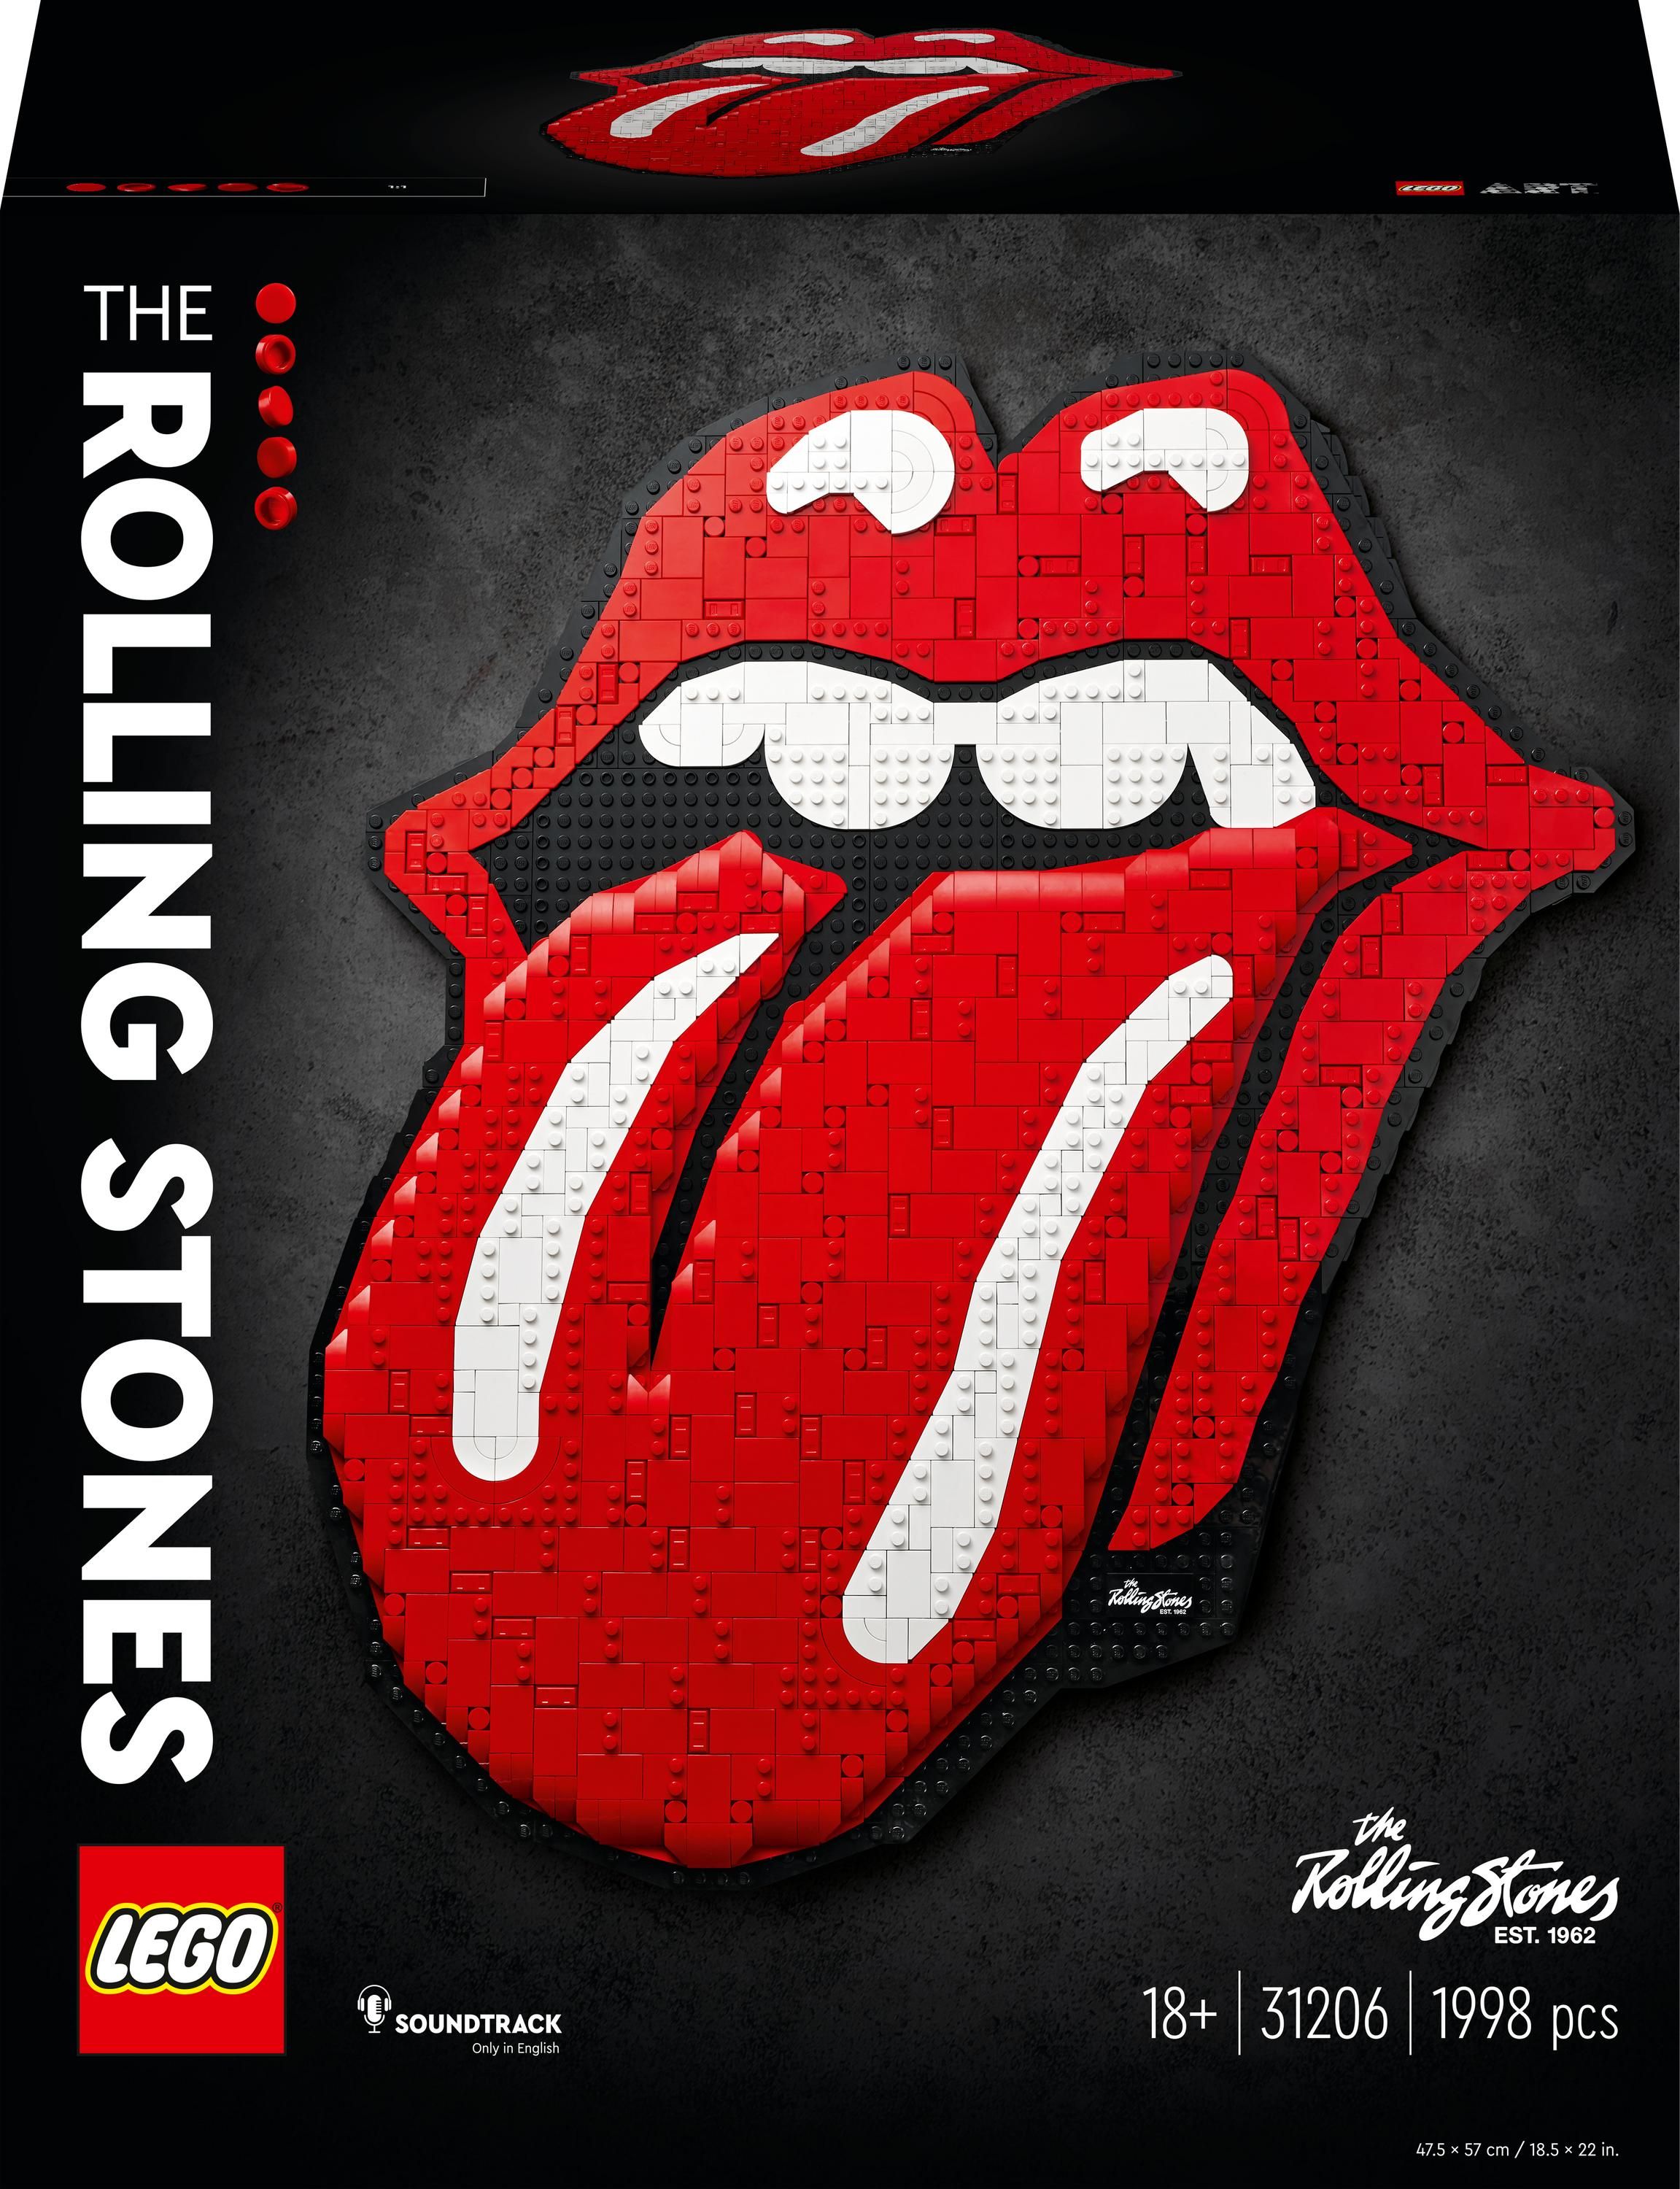 LEGO® Art - The Rolling Stones 31206, 1998 piese